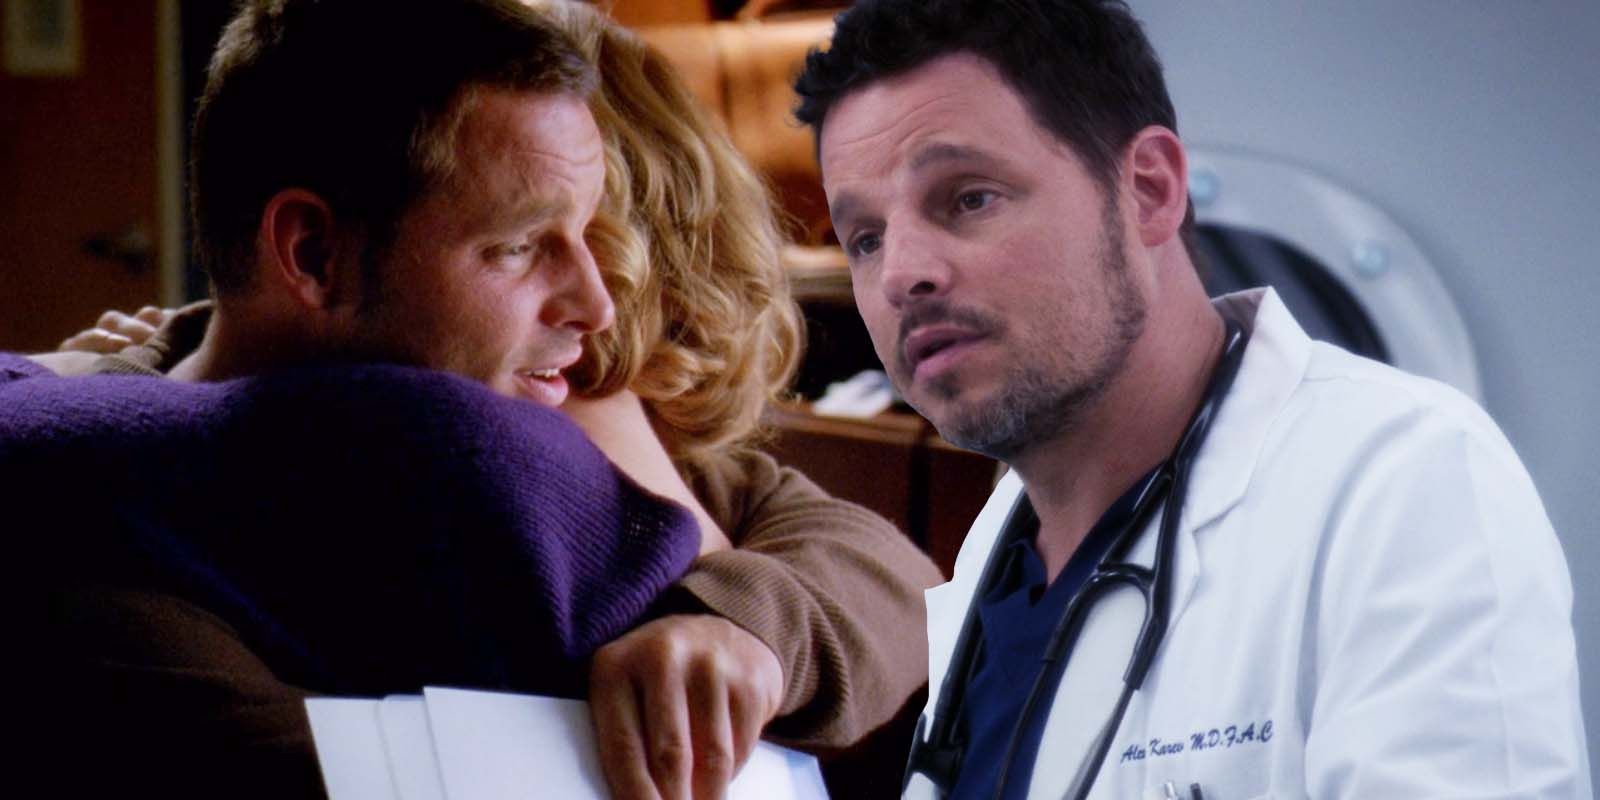 Katherine Heigl as Izzie Stevens and Justin Chambers as Alex Karev in Grey's Anatomy S06E12 and Justin Chambers as Alex Karev in Grey's Anatomy S15E25